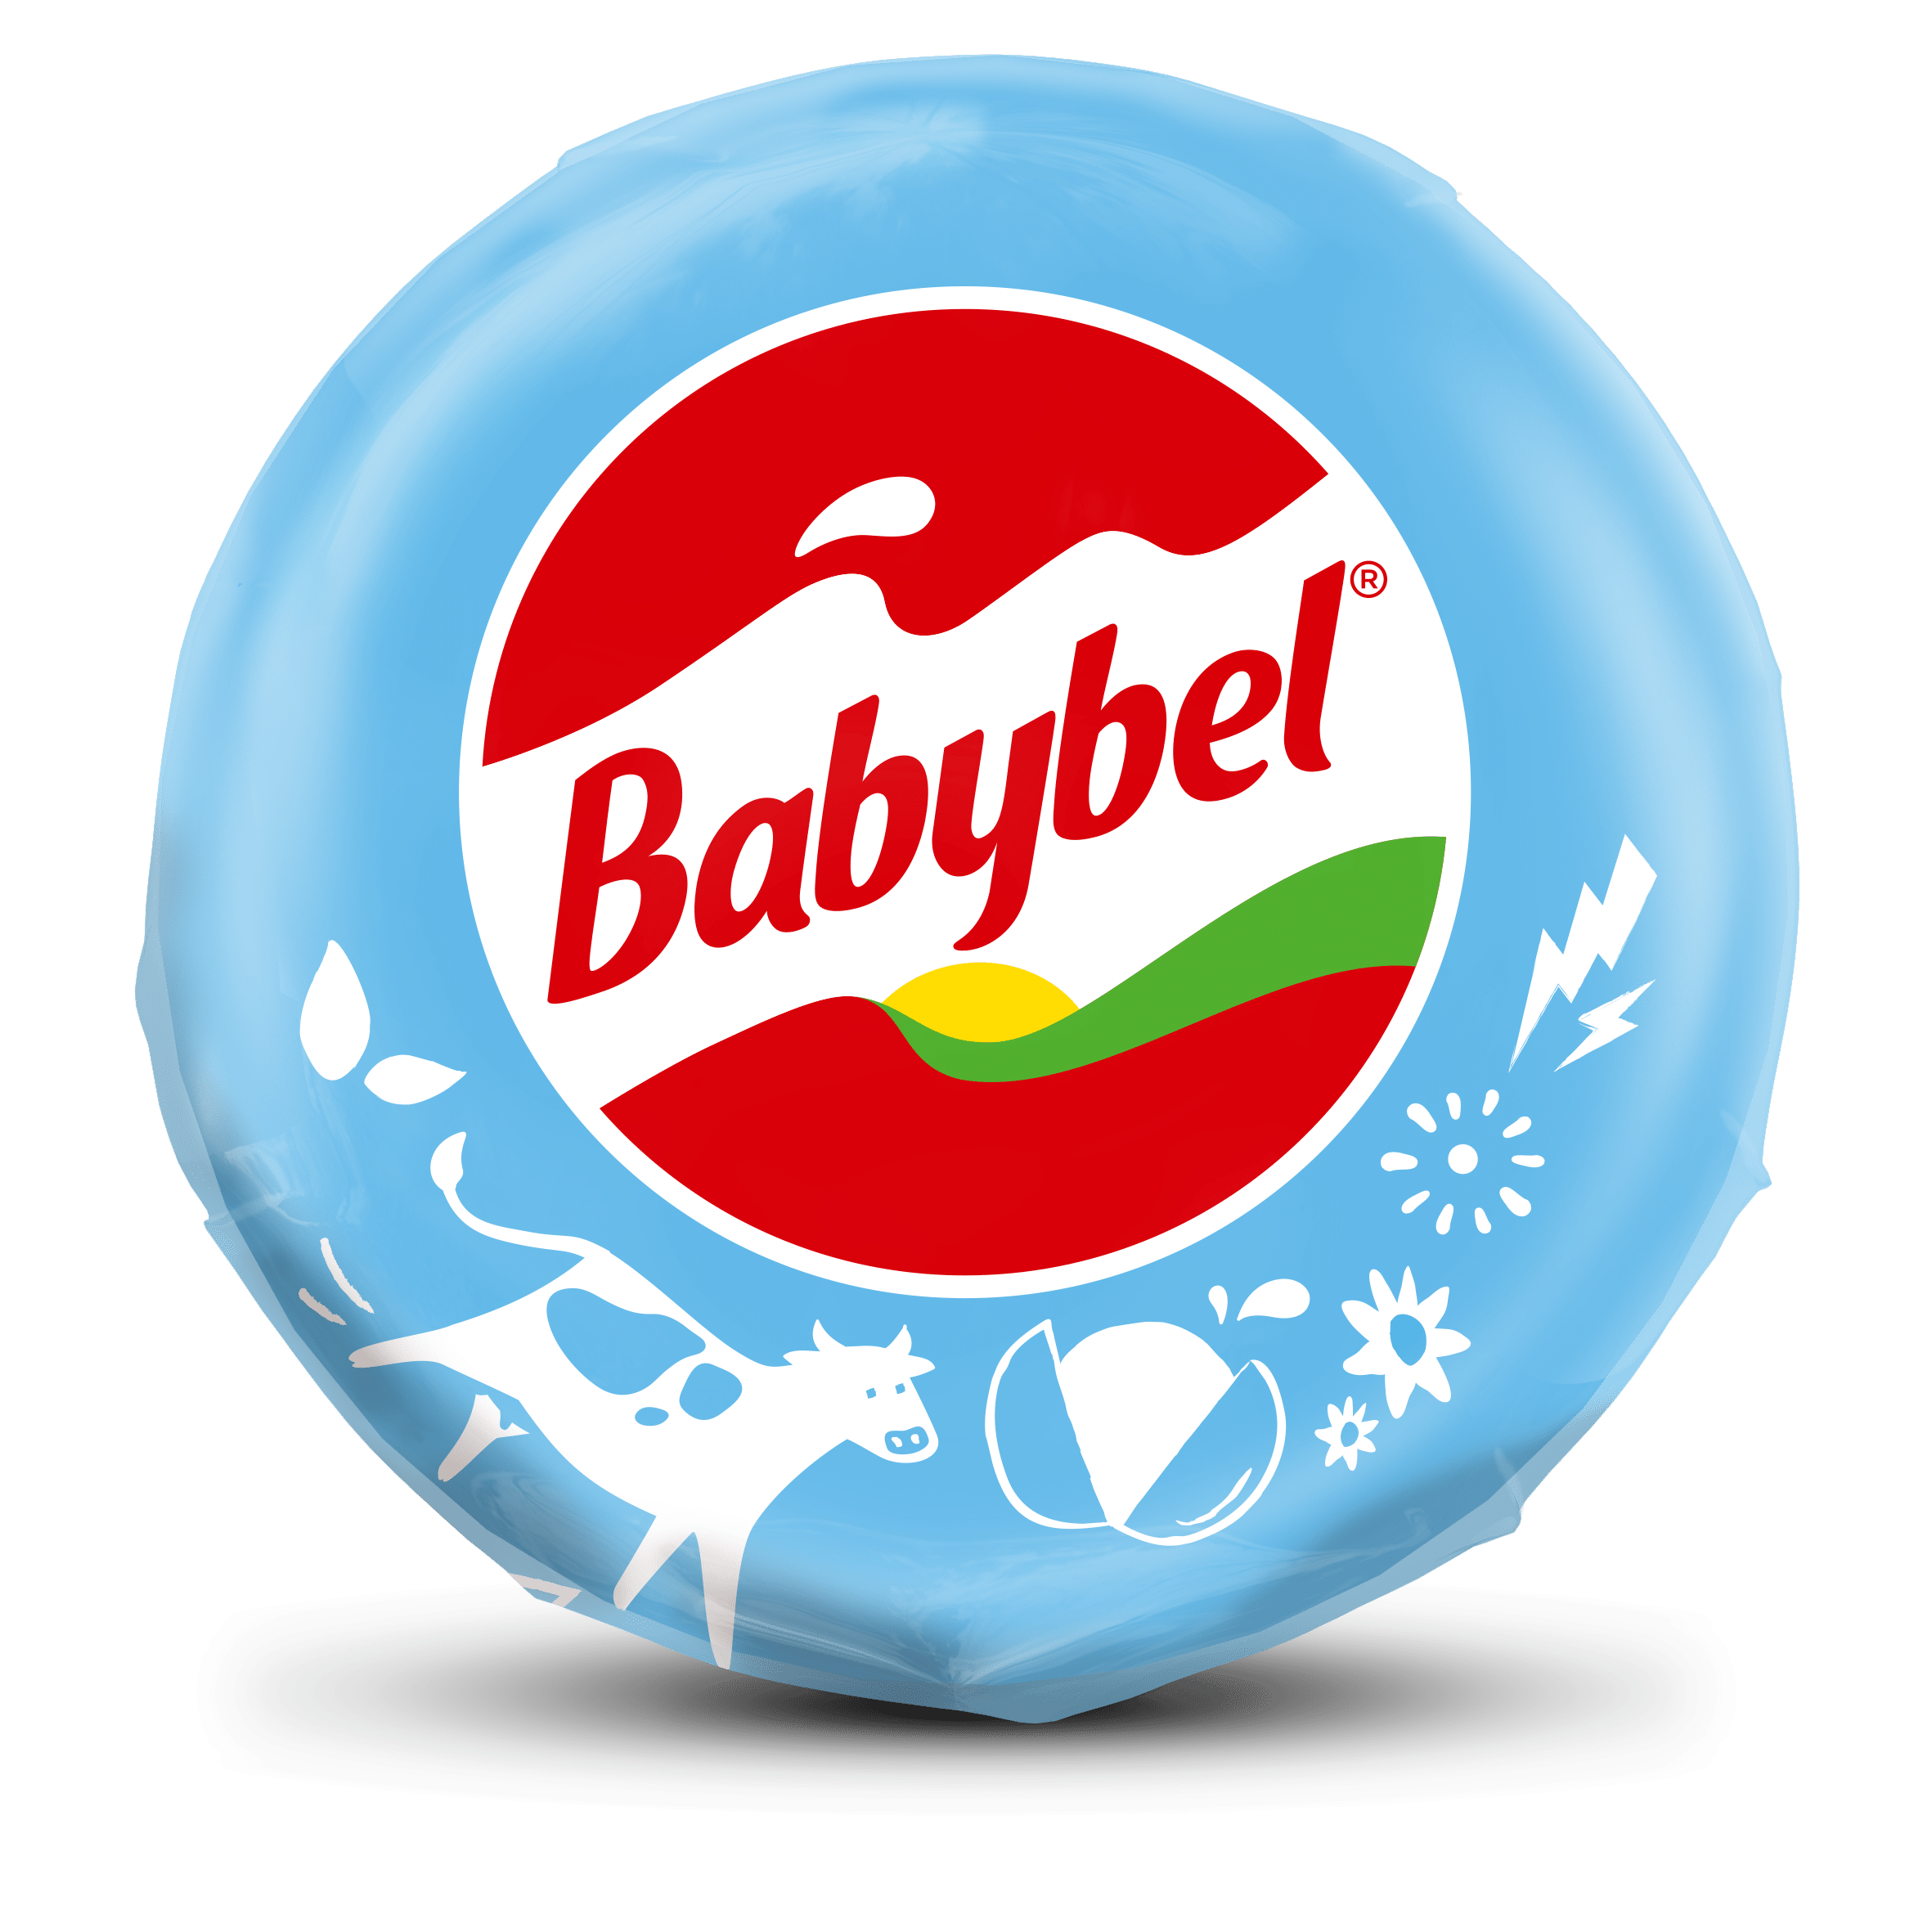 This ball I mashed together out of BabyBel cheese wax : r